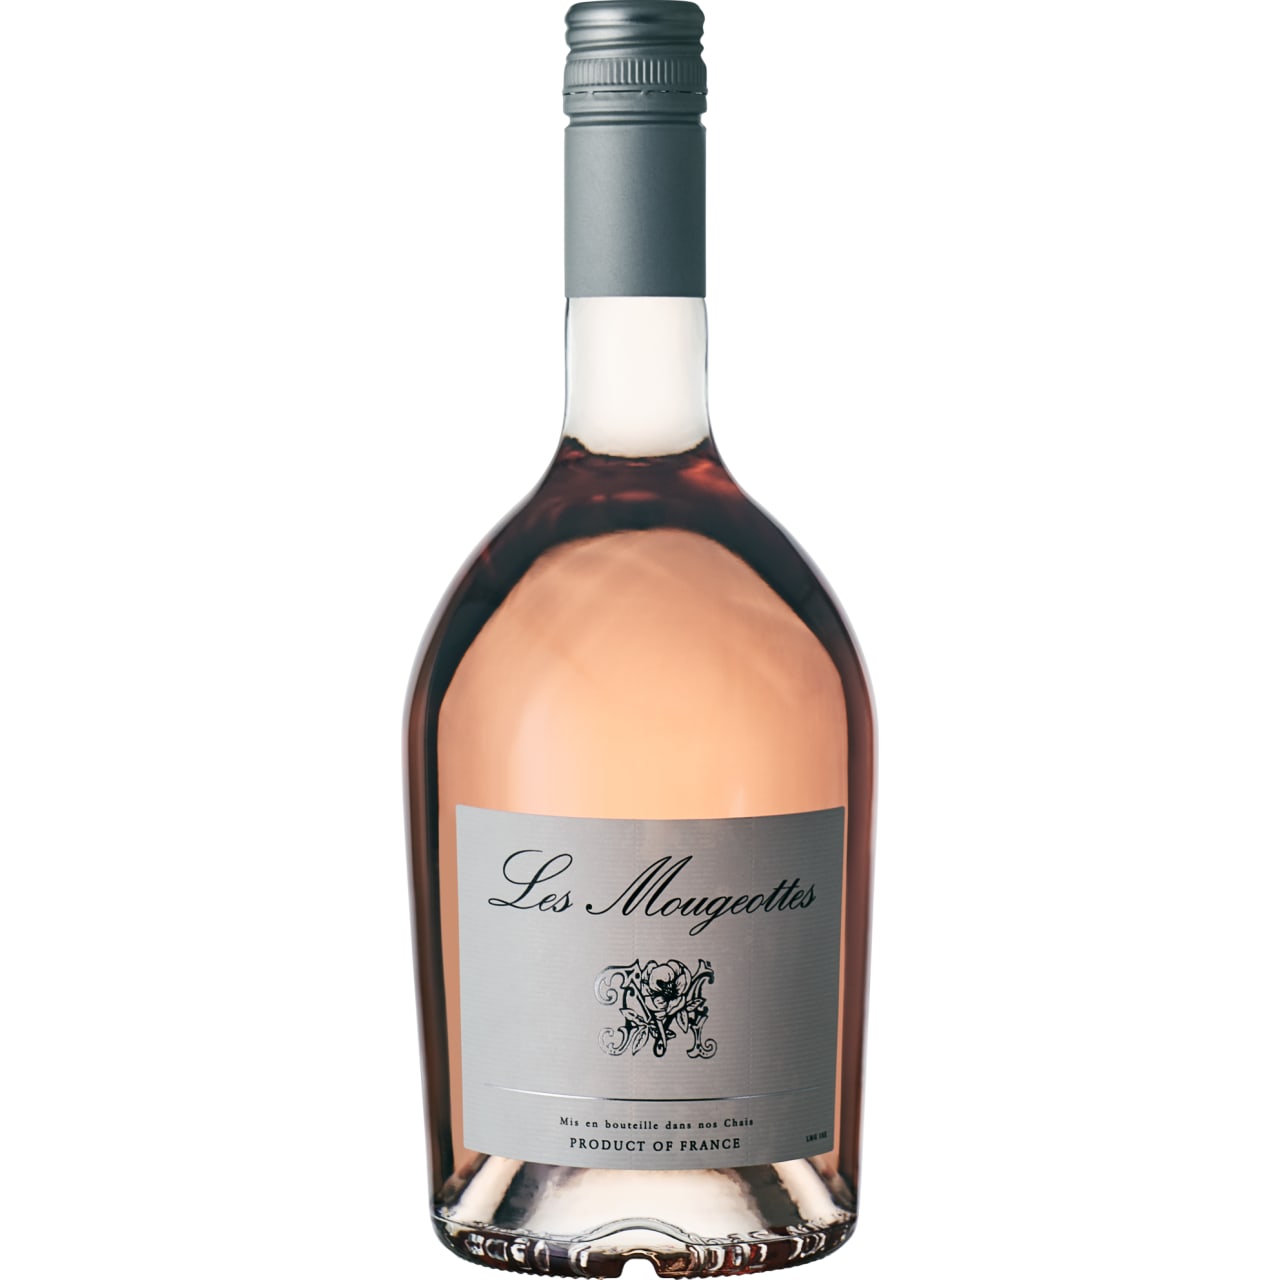 Raspberry, strawberry and blossom notes on the nose with ripe red berry and peach flavours on palate. This is an elegant wine with refreshing acidity.